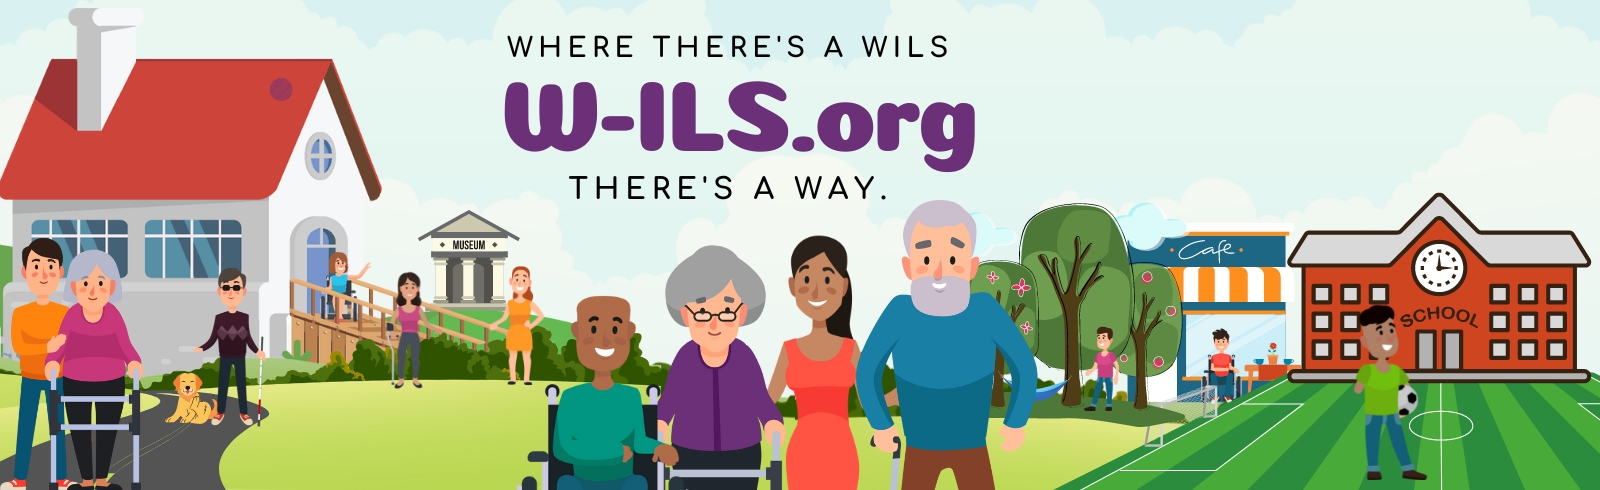 The text where there's a W-ILS, there's a way overlaid on an image that shows people of various ages and abilities independently enjoying access to their homes and community.